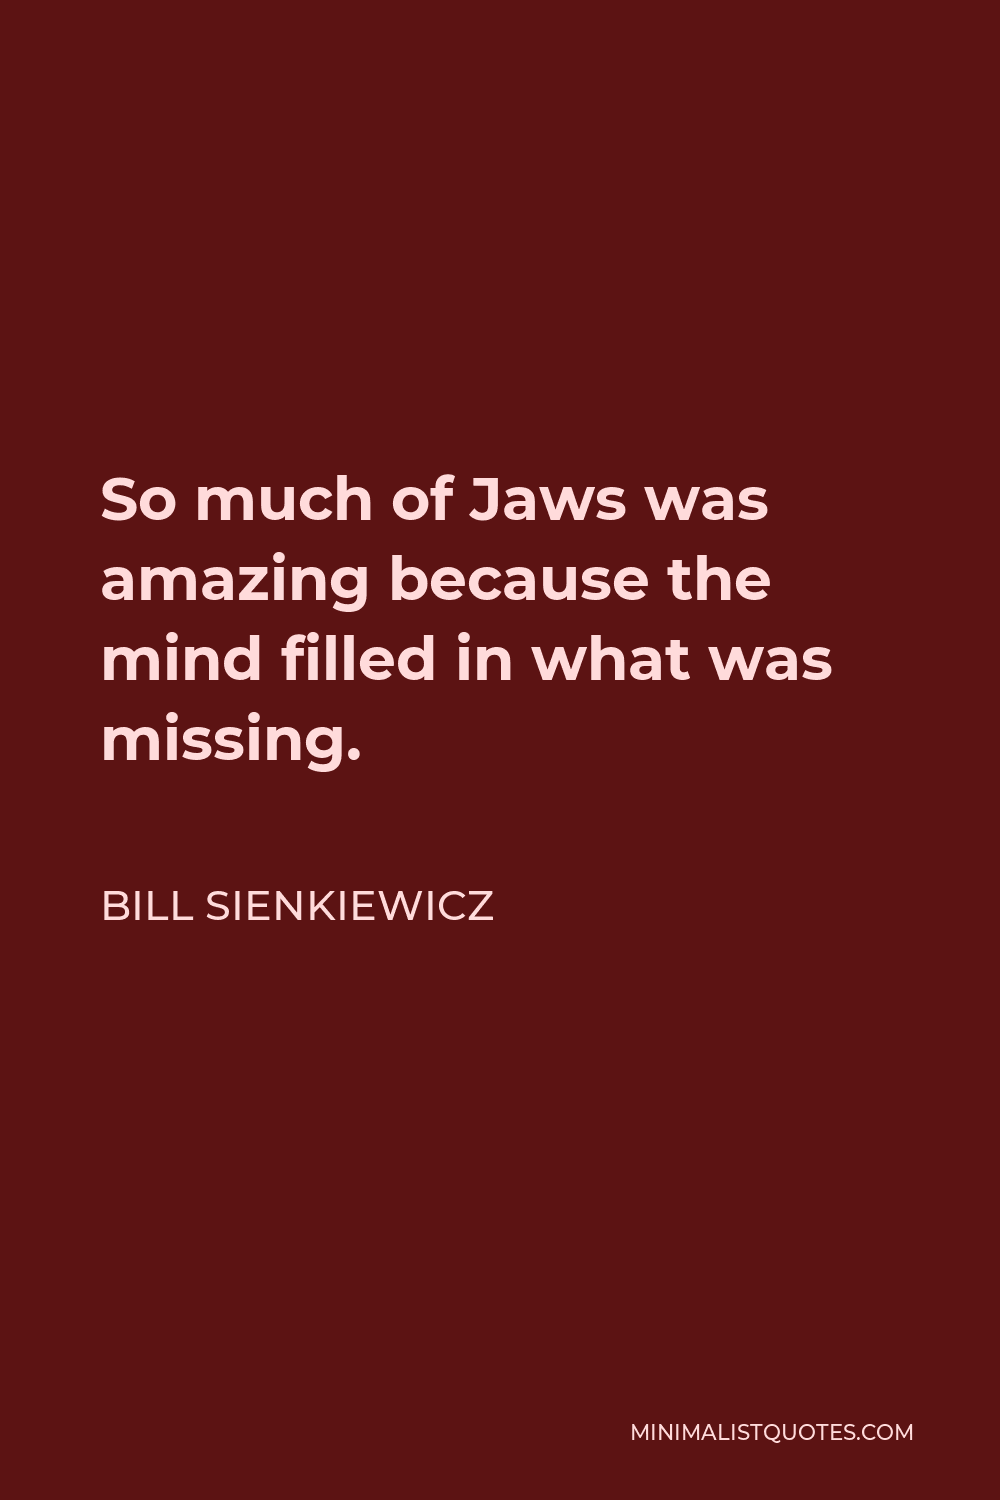 Bill Sienkiewicz Quote - So much of Jaws was amazing because the mind filled in what was missing.